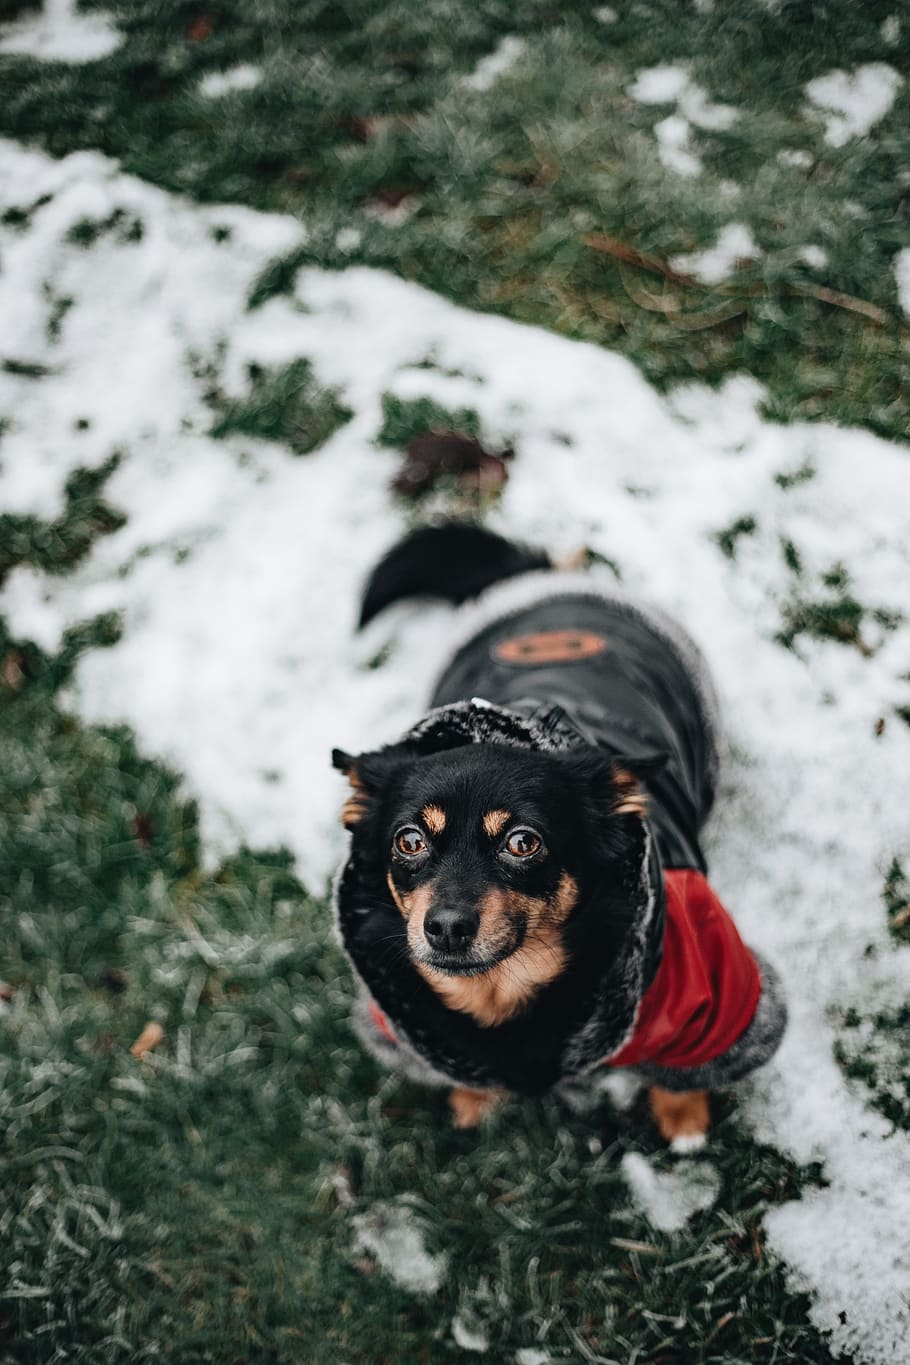 small, dog, warm, jacket, pet, animal, cute, puppy, winter, cold